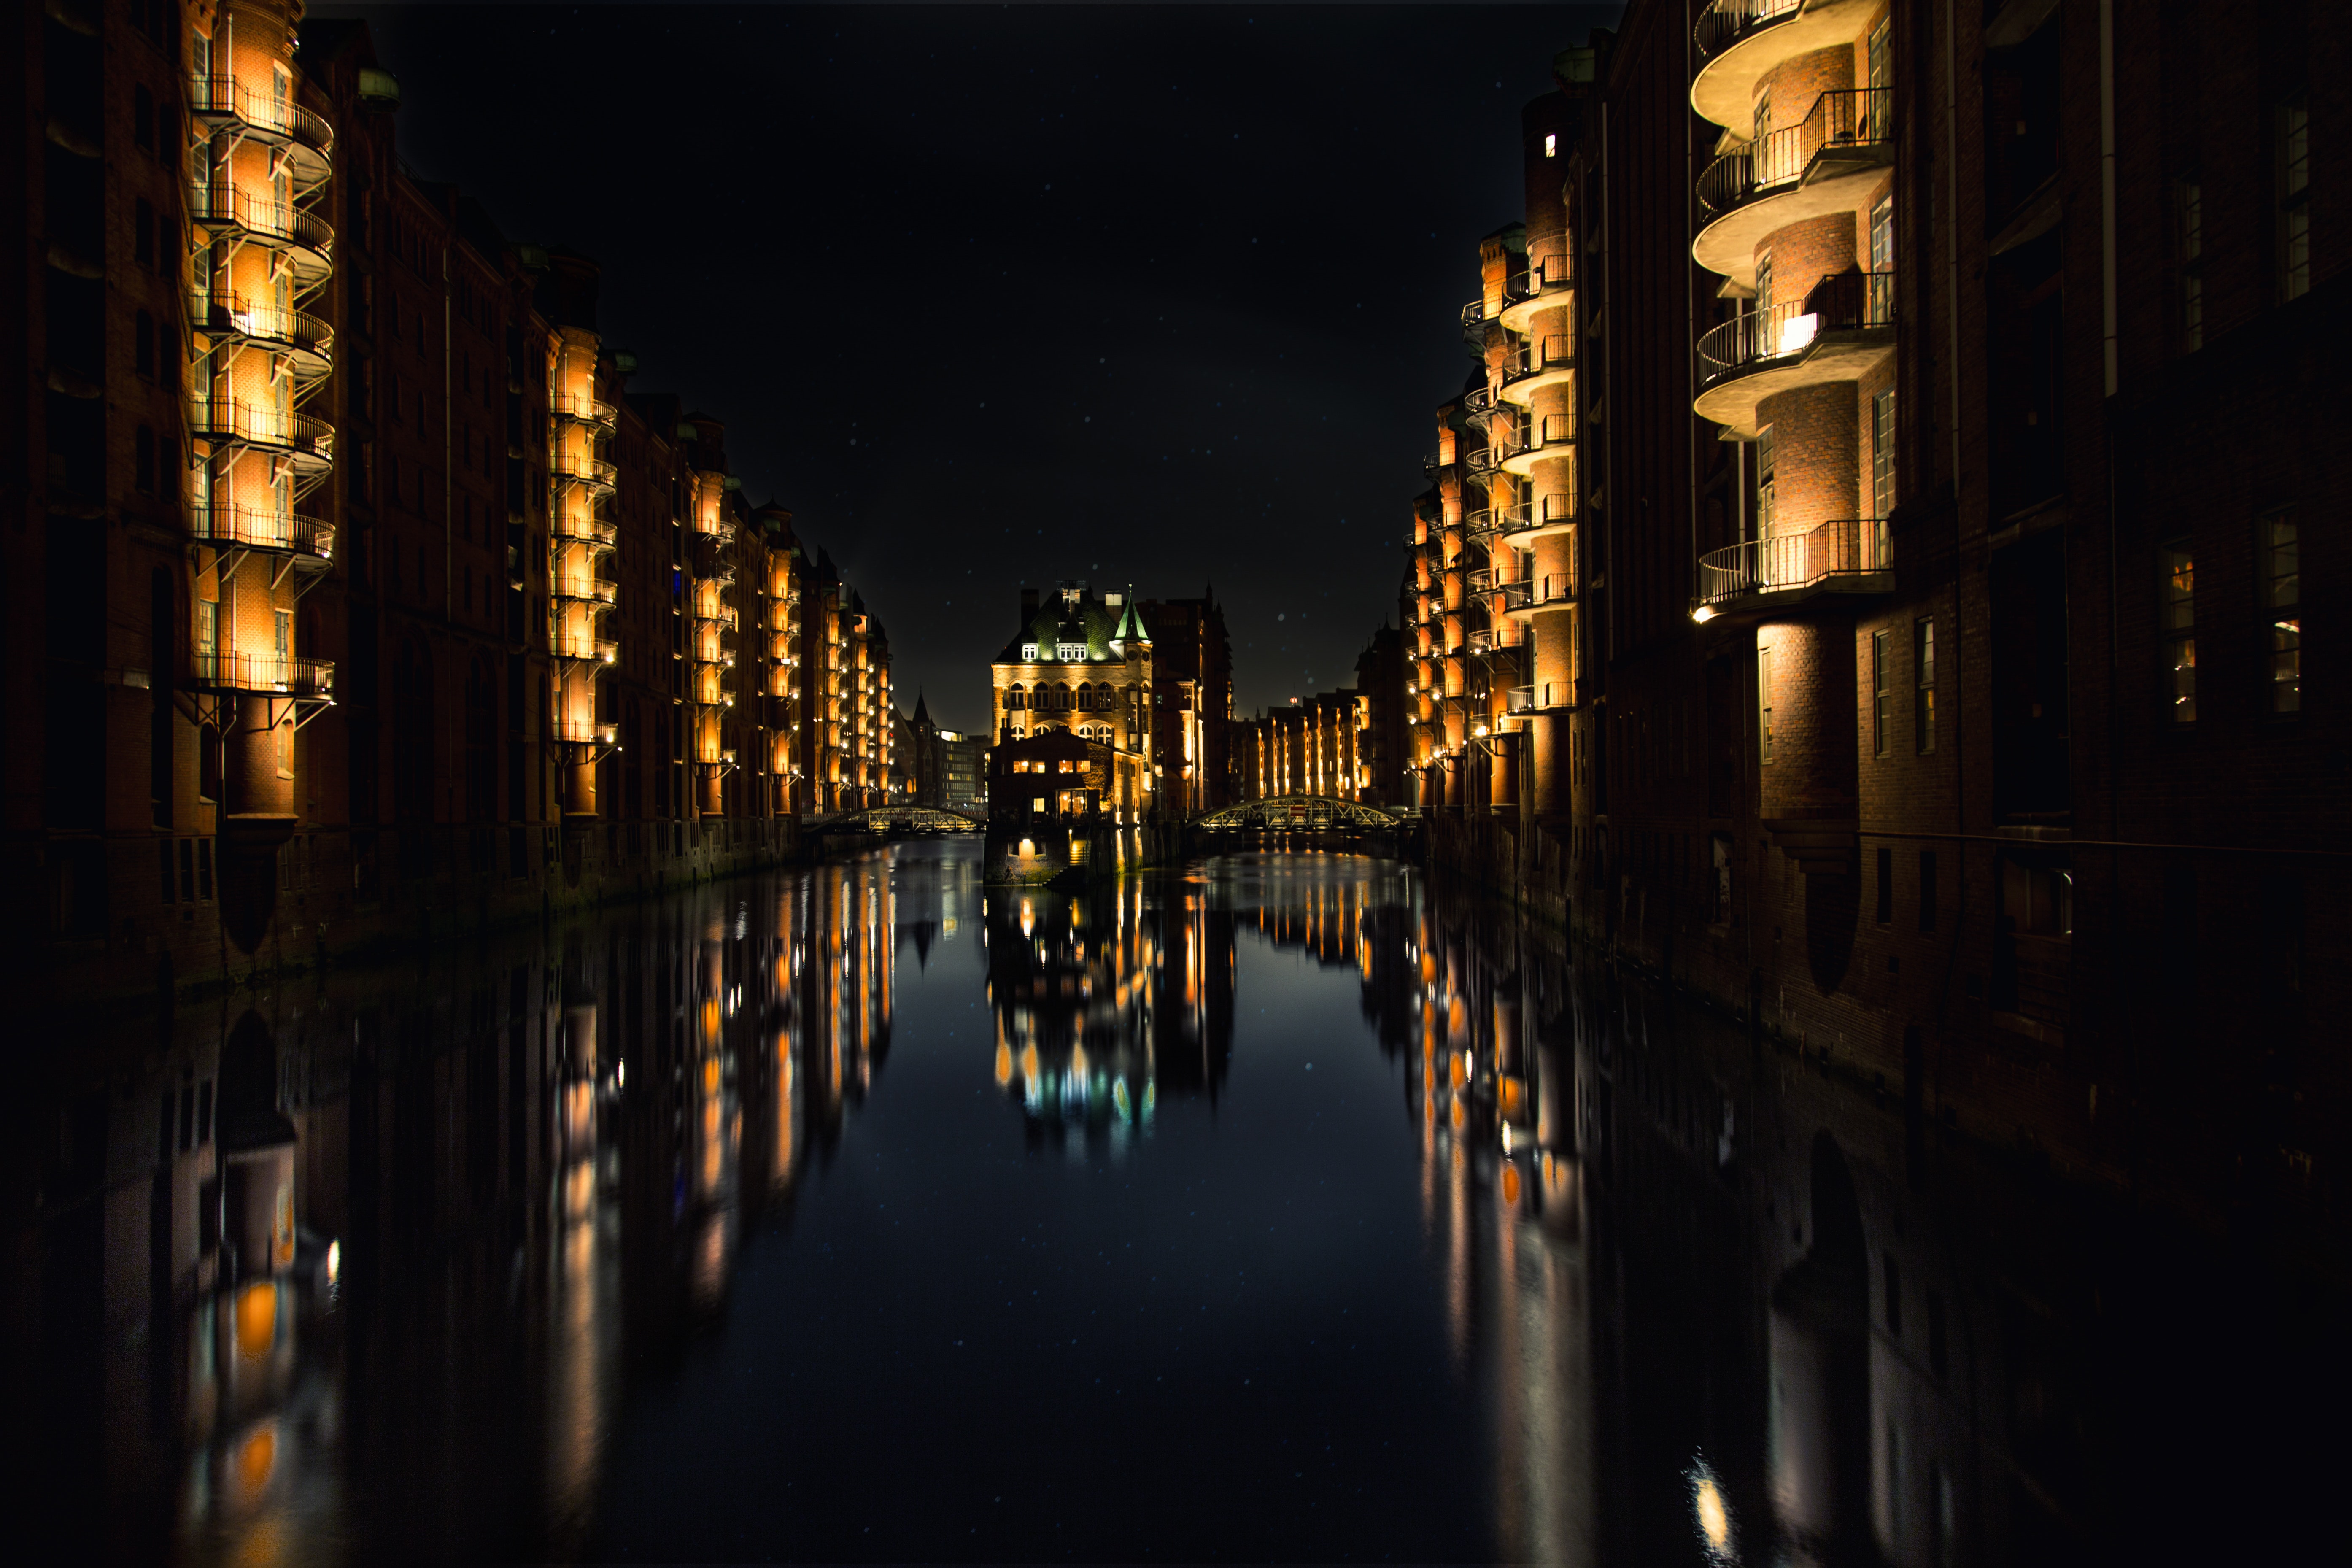 Reflection of buildings on water during nighttime photo